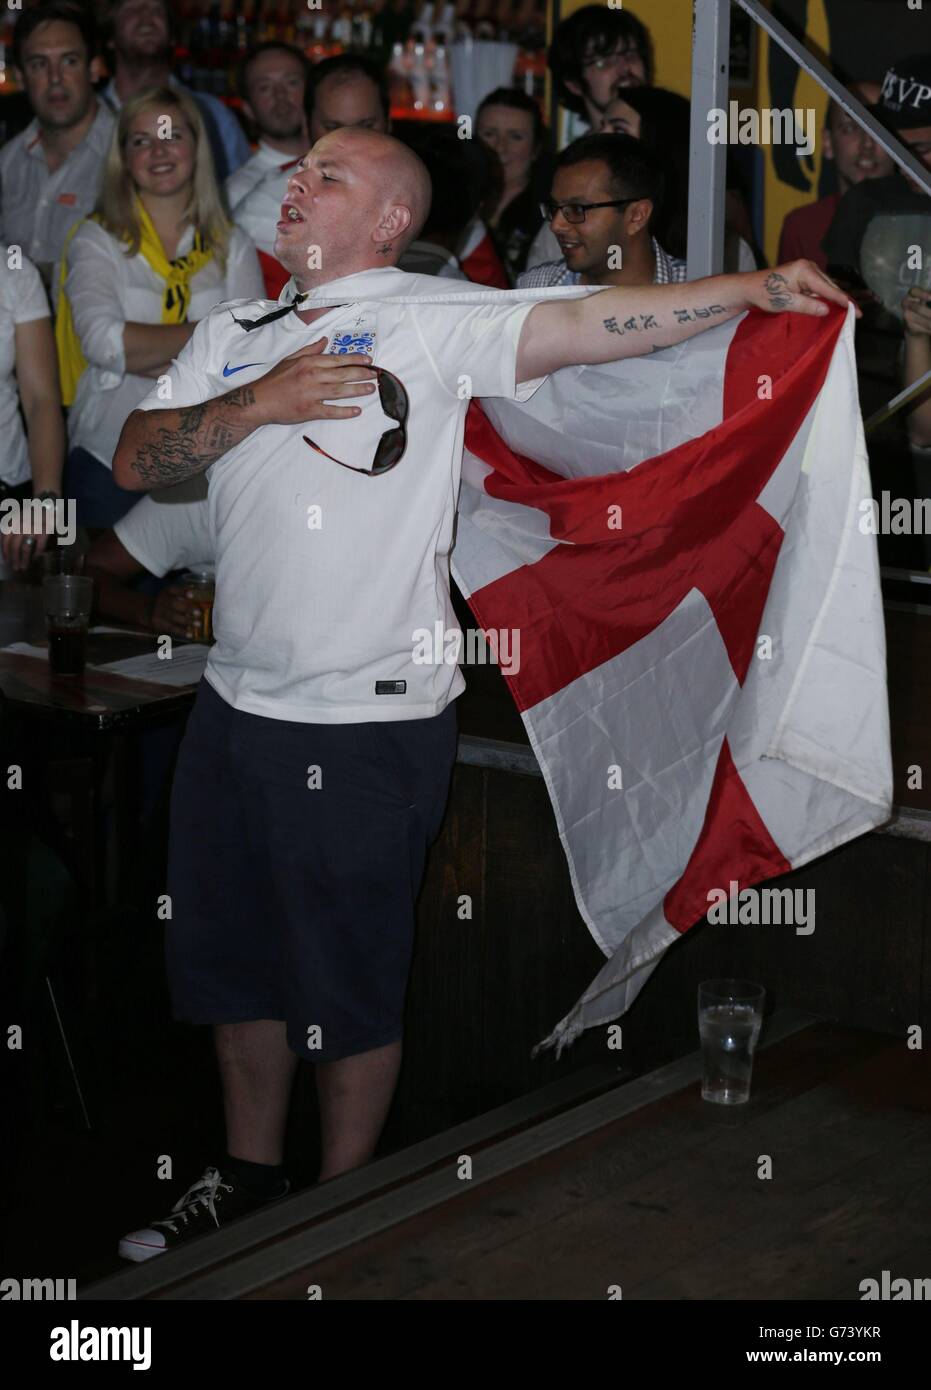 A man sings the national anthem before supporters in the Walkabout Temple, Temple Place in central London watch the England v Italy Group Stage game in the 2014 Fifa World Cup in Brazil. Stock Photo